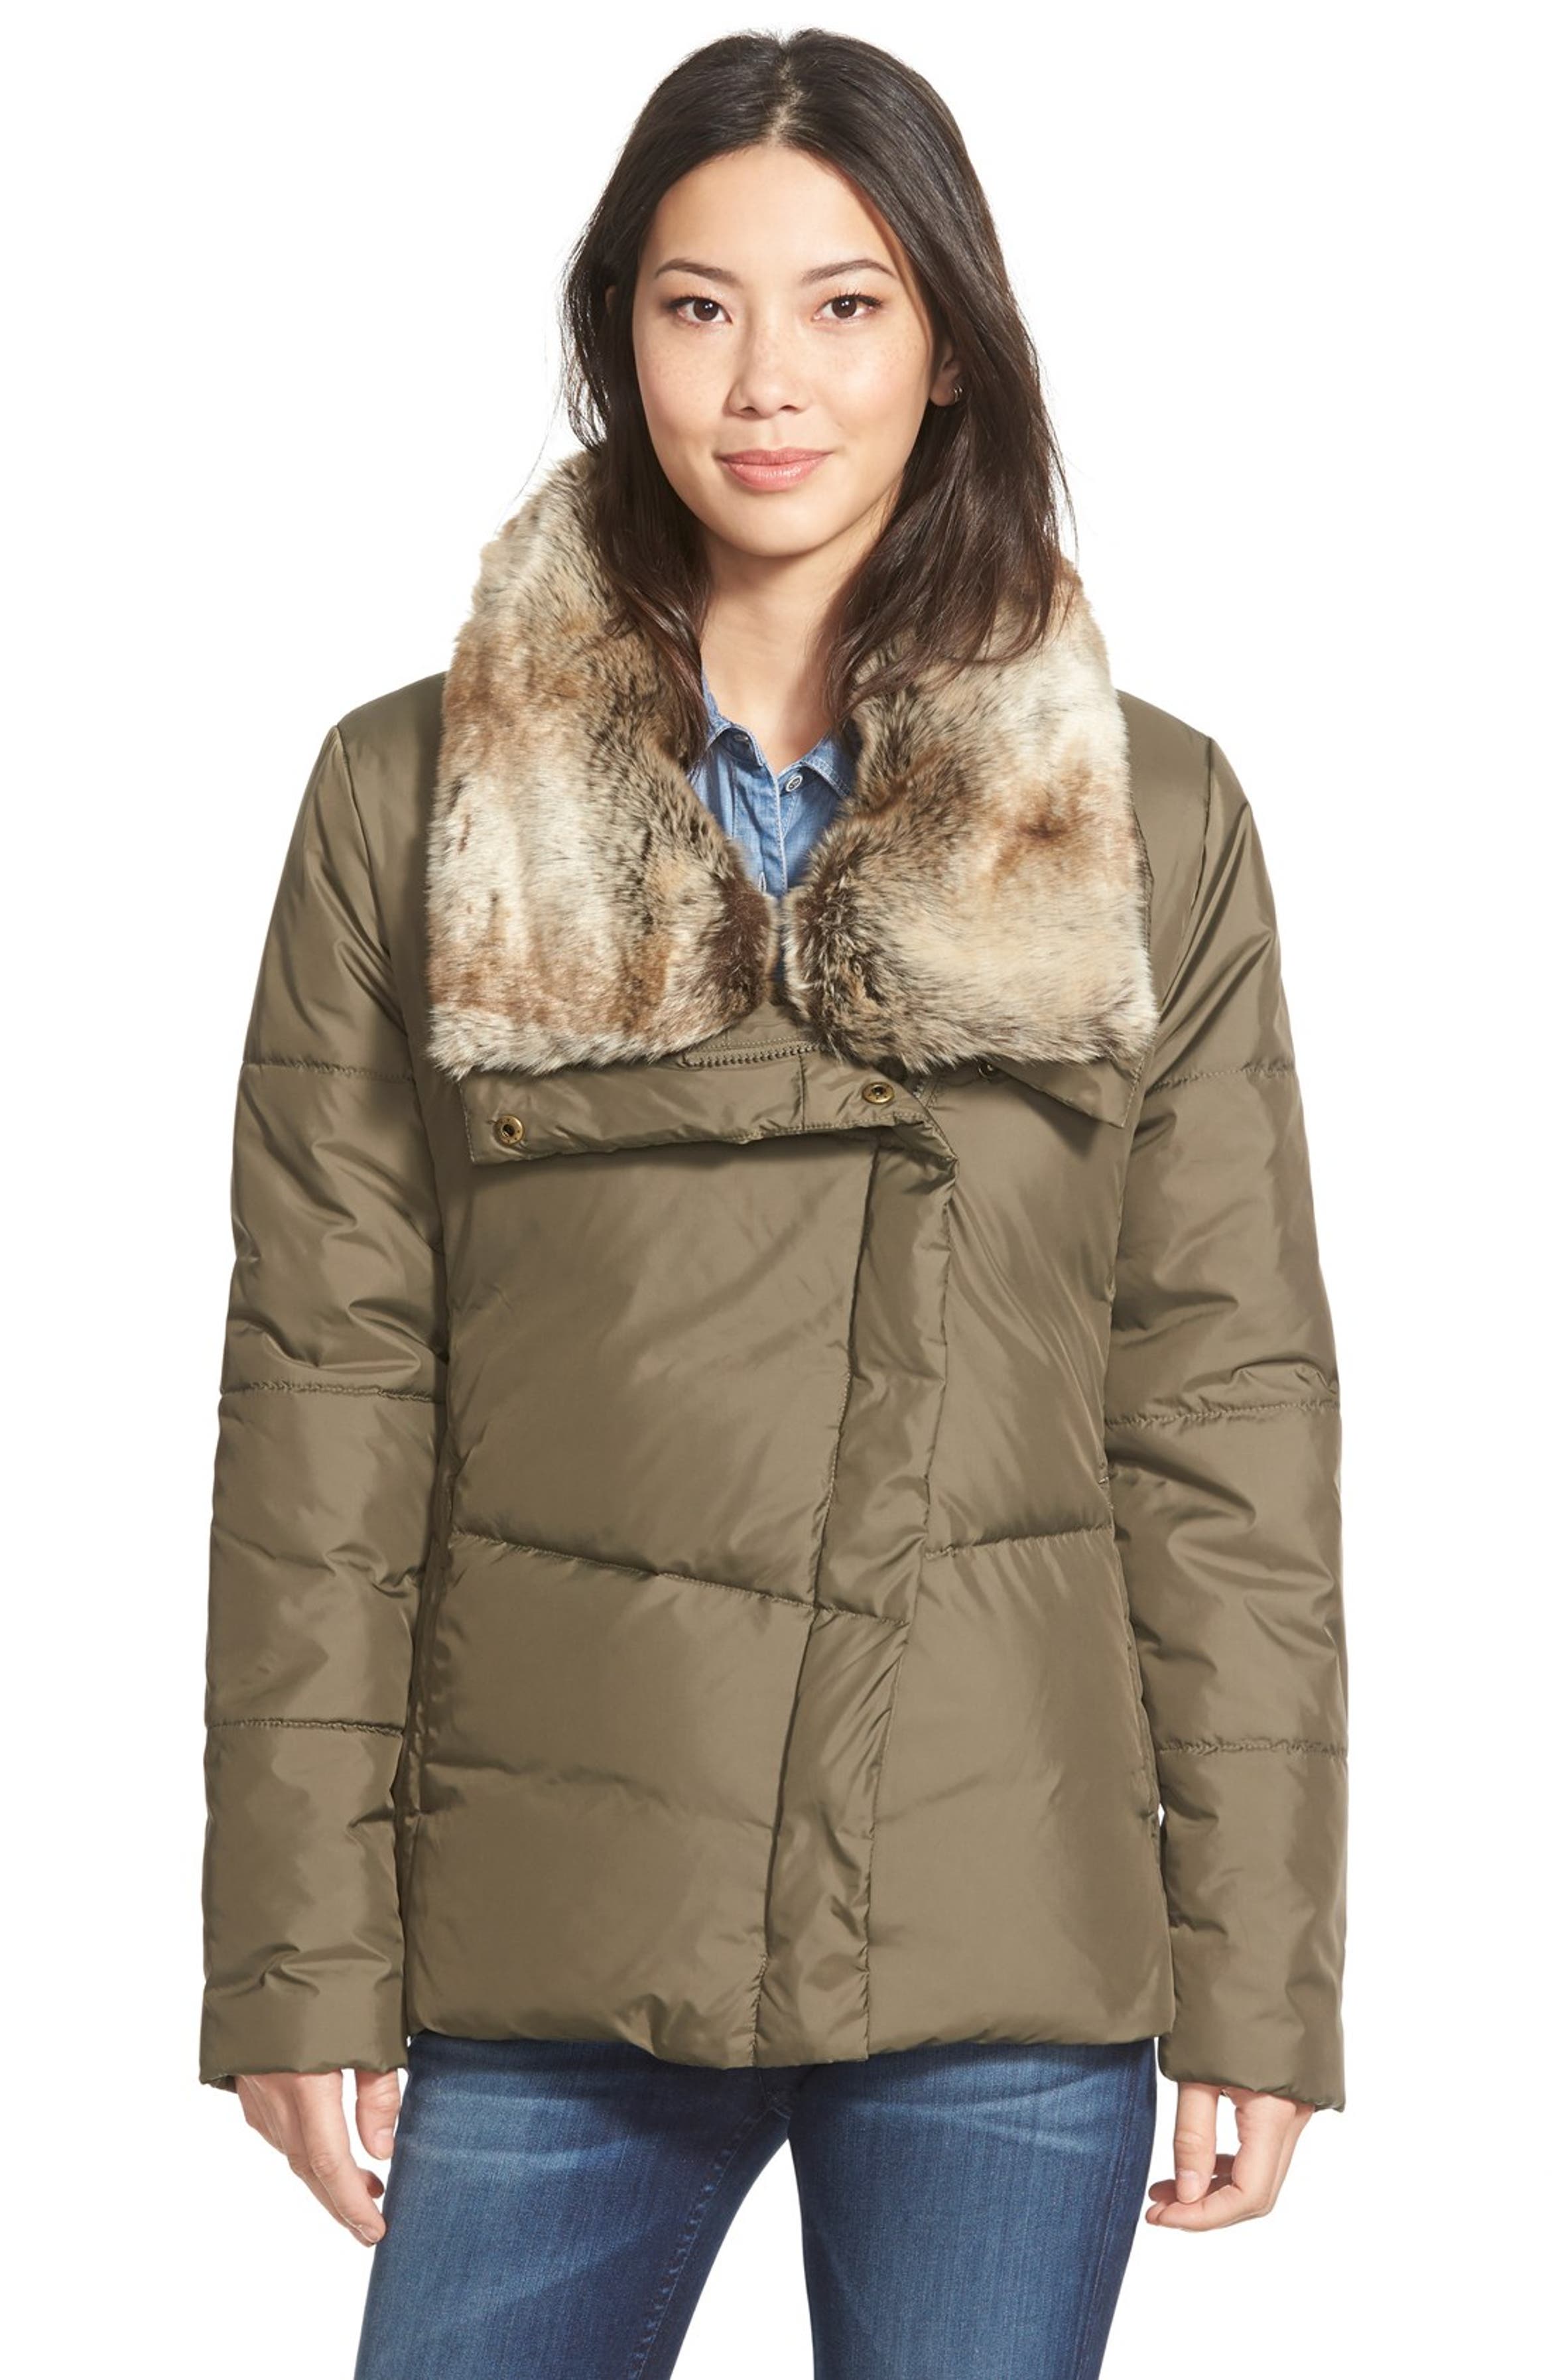 Hawke & Co. Asymmetrical Down Jacket with Faux Fur Collar | Nordstrom